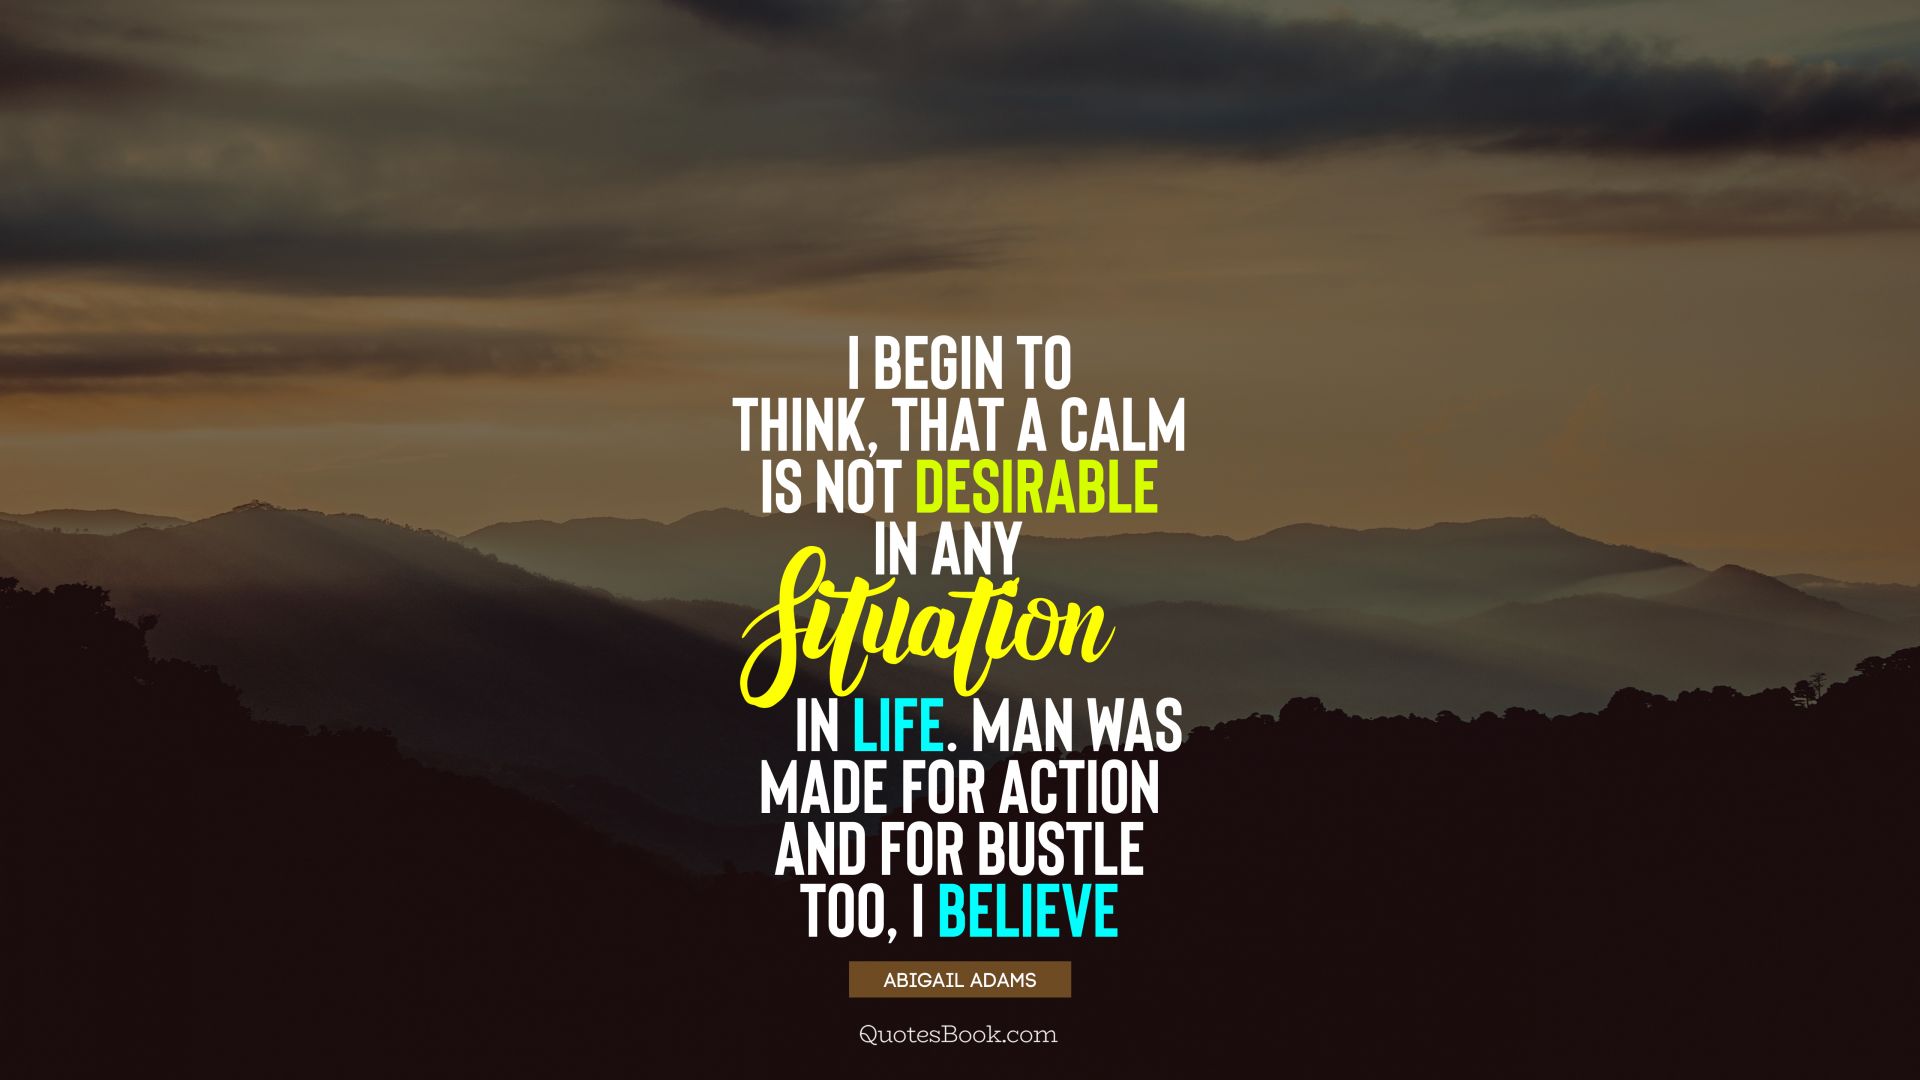 I begin to think, that a calm is not desirable in any situation in life. Man was made for action and for bustle too, I believe. - Quote by Abigail Adams